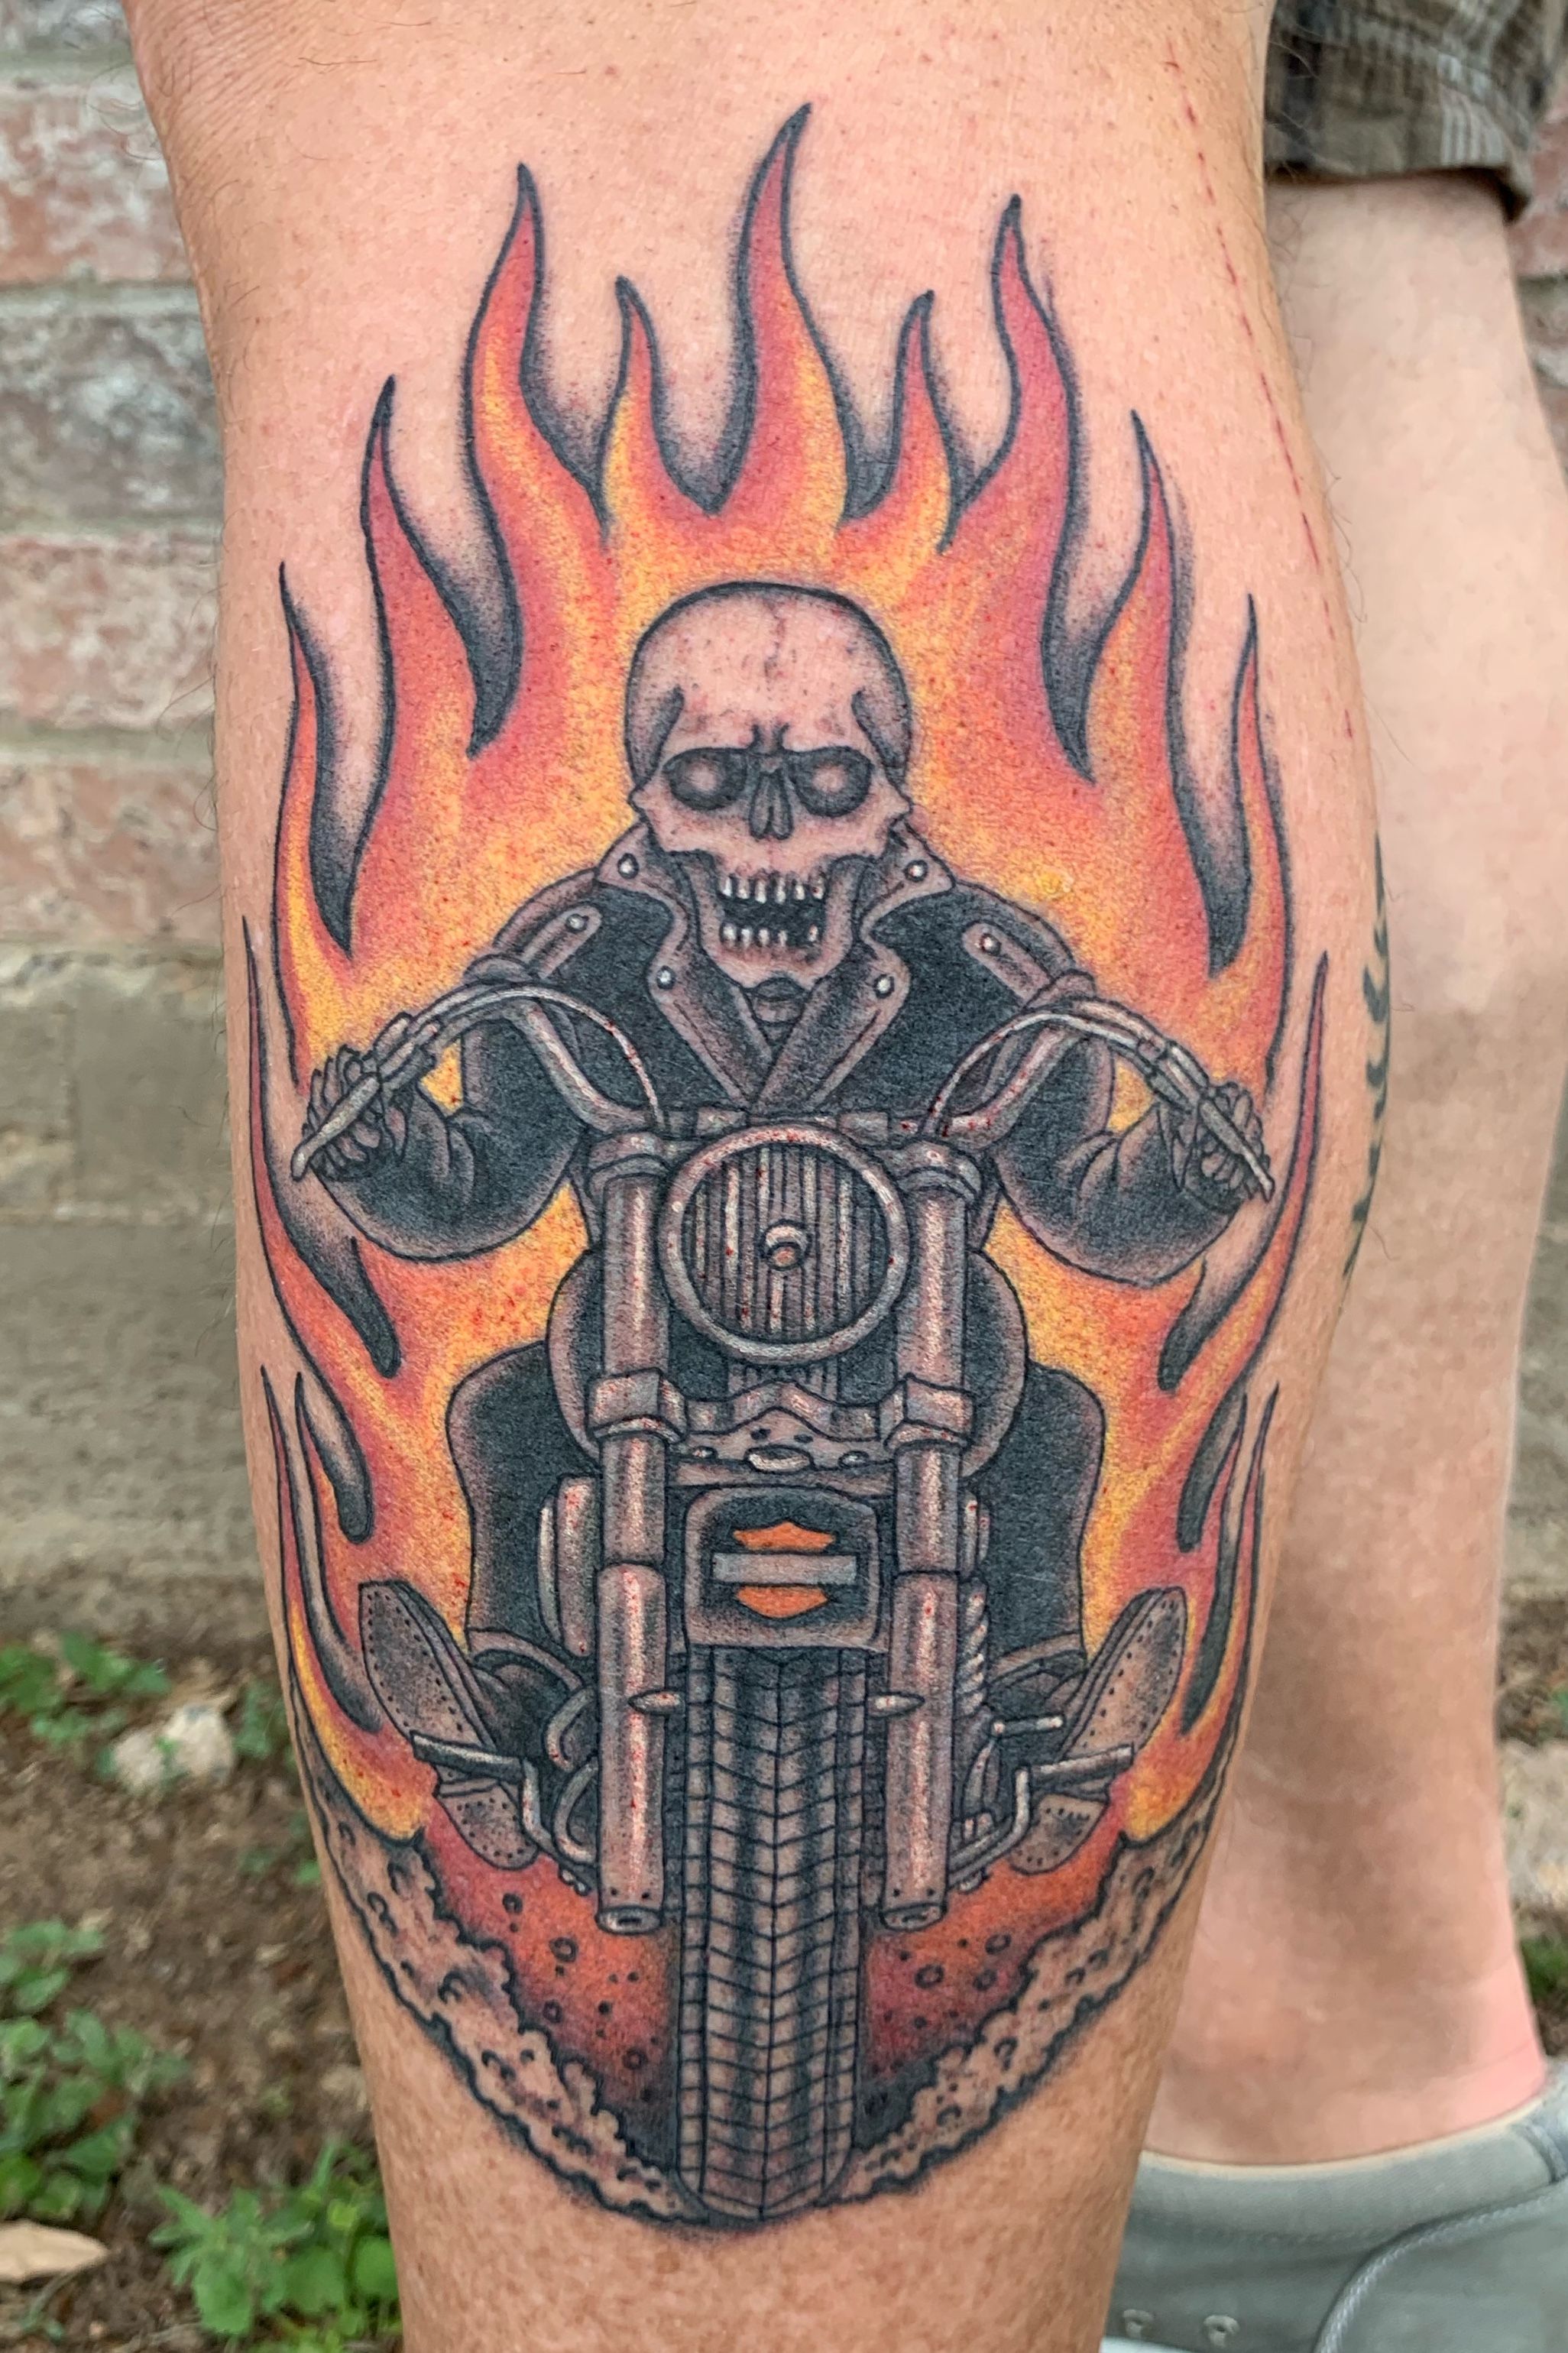 Aaron's Harley Skull | Today's work - Harley Shield and Skull. Thanks  Aaron! | By The Ink Spot Tattoo StudioFacebook